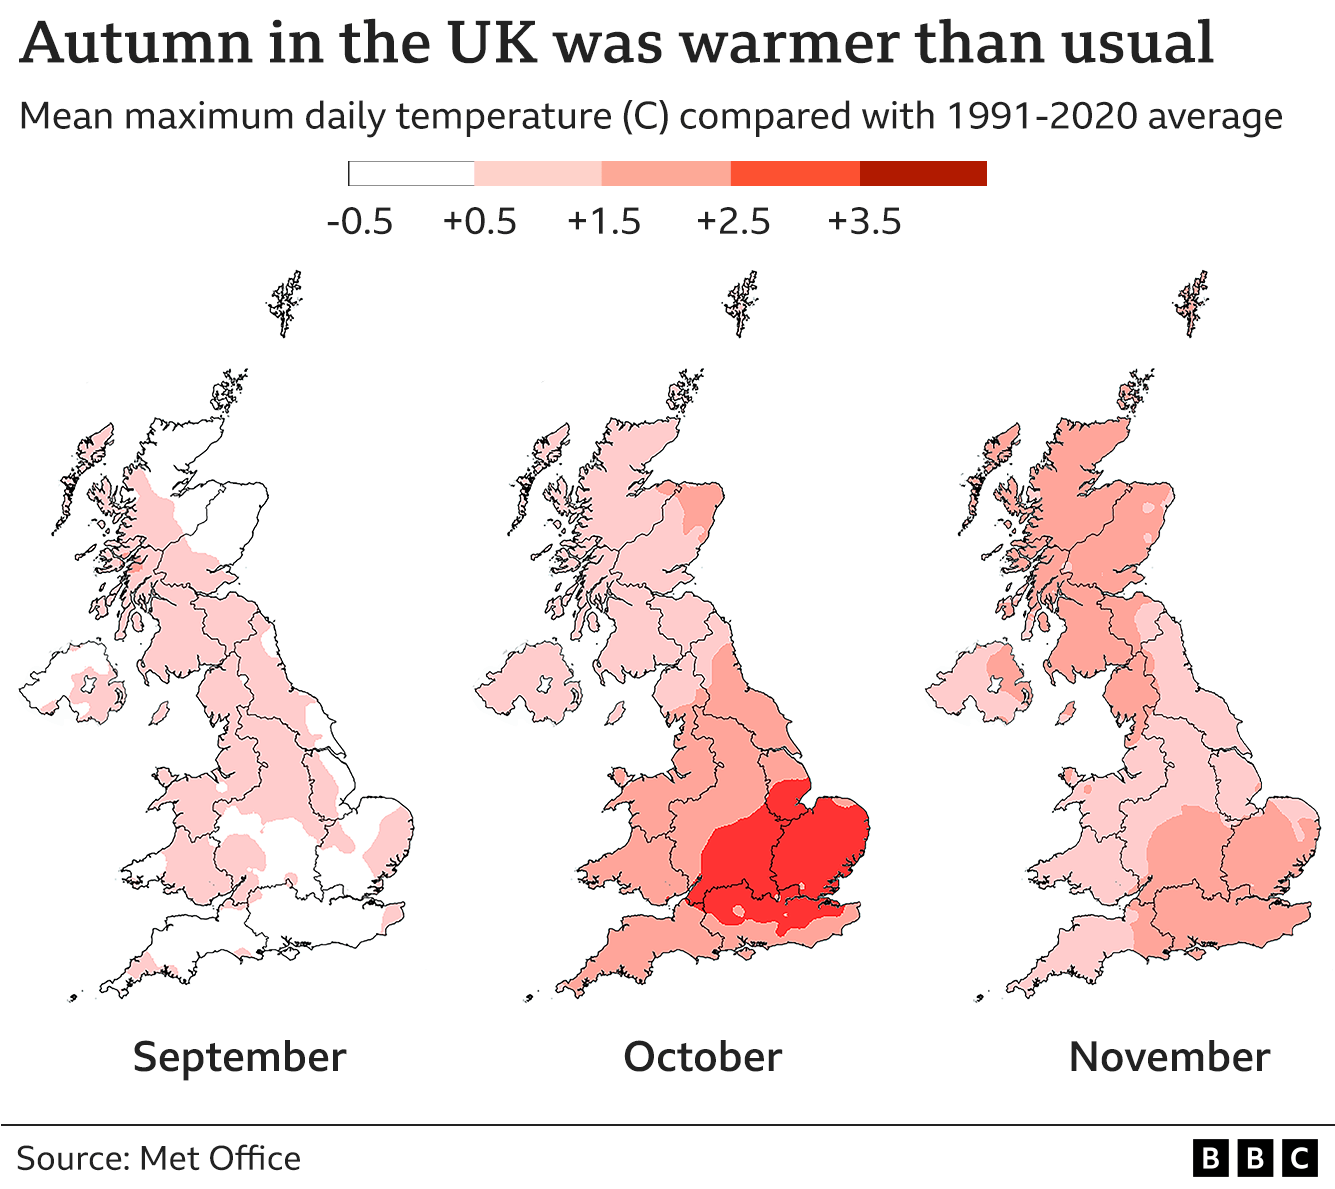 Three maps showing how the monthly averages for the highest daily temperature in the UK in September, October and November were higher than usual